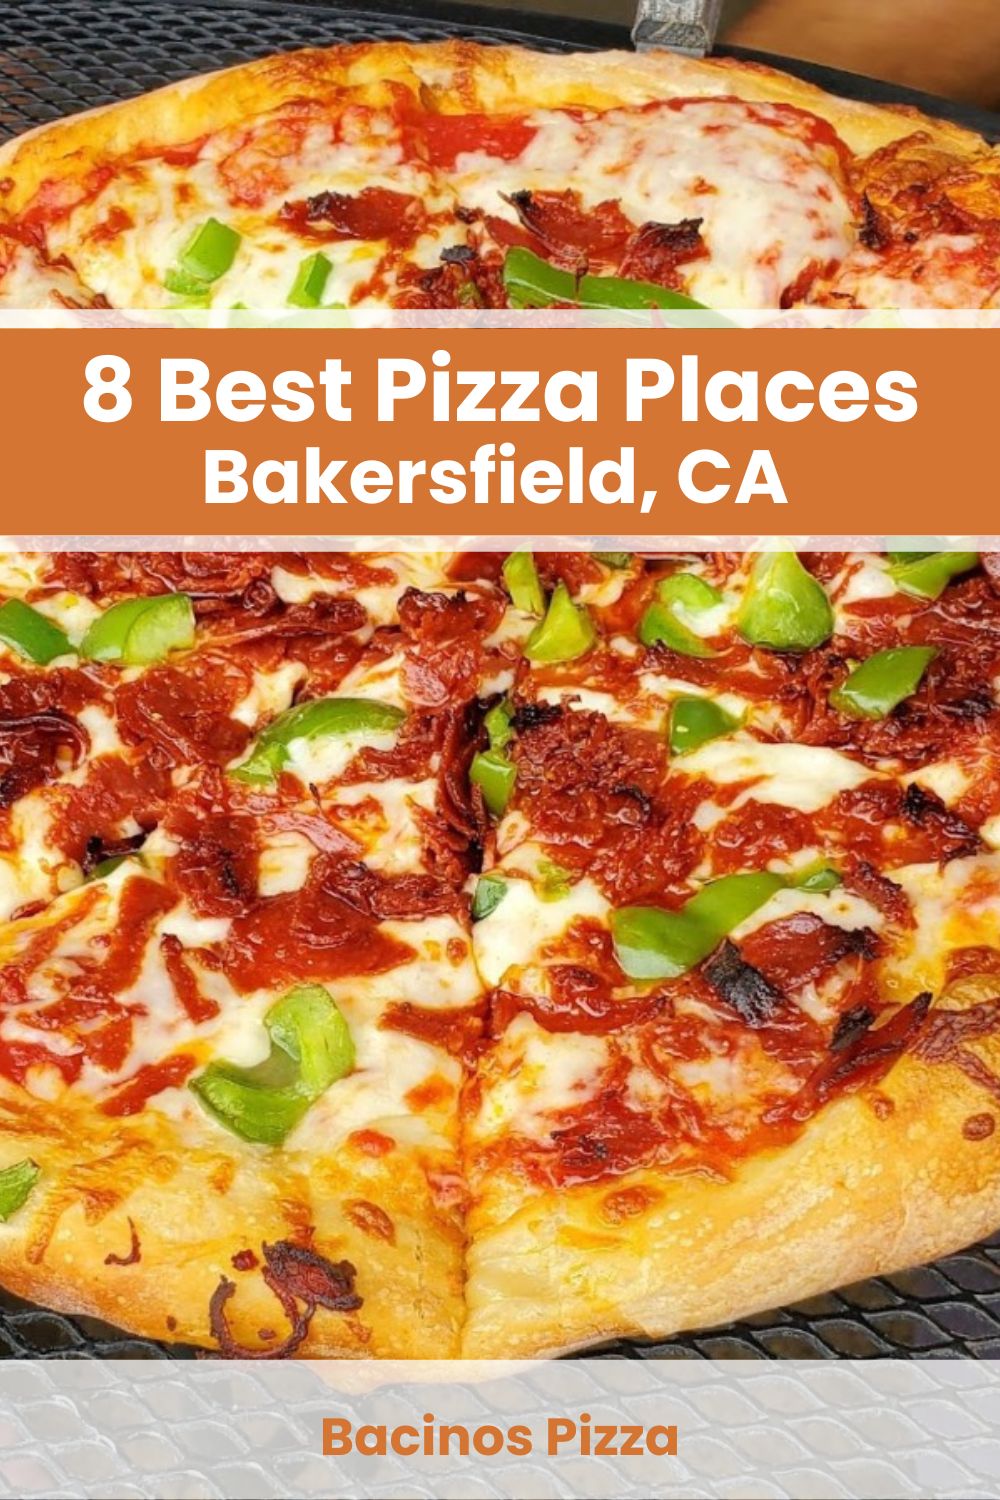 Best Pizza Places in Bakersfield